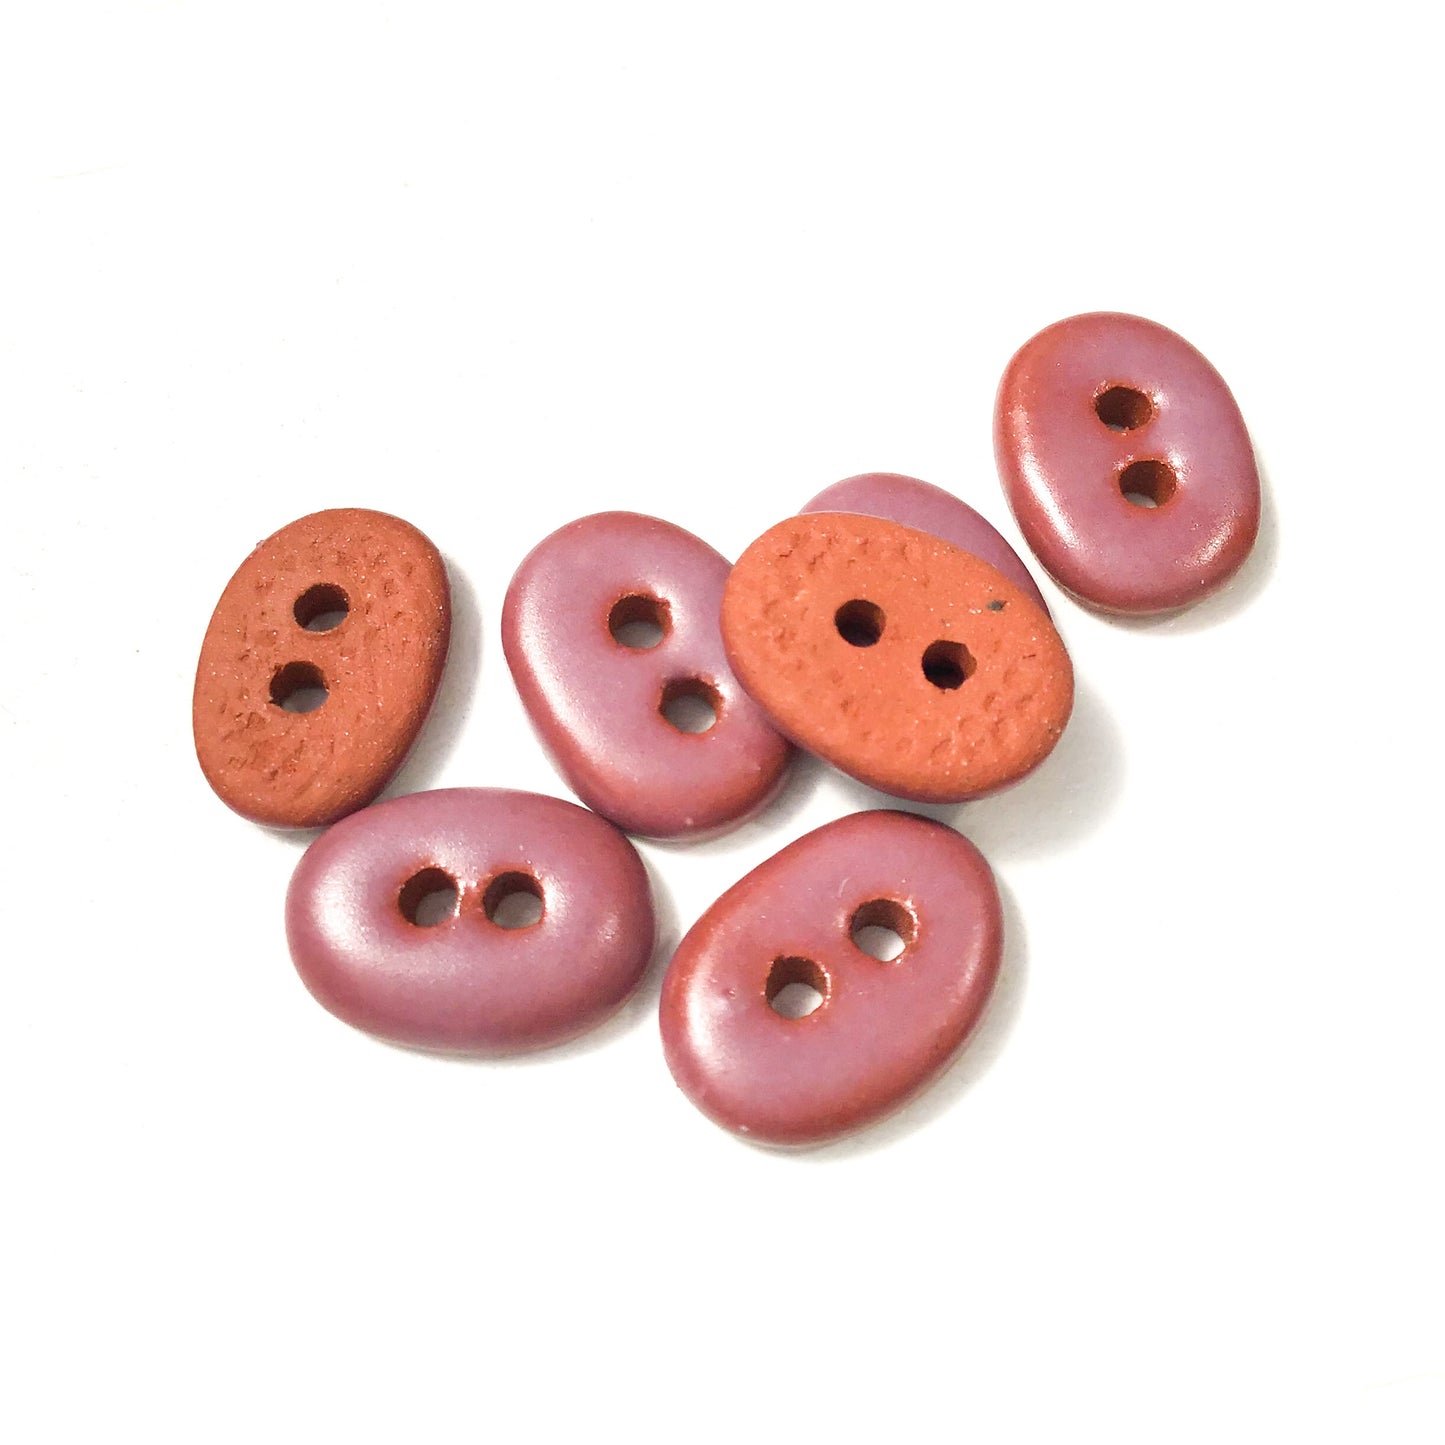 Matte Plum Ceramic Buttons - Small Oval Clay Buttons - 7/16" x 9/16" - 6 Pack or 7 Pack